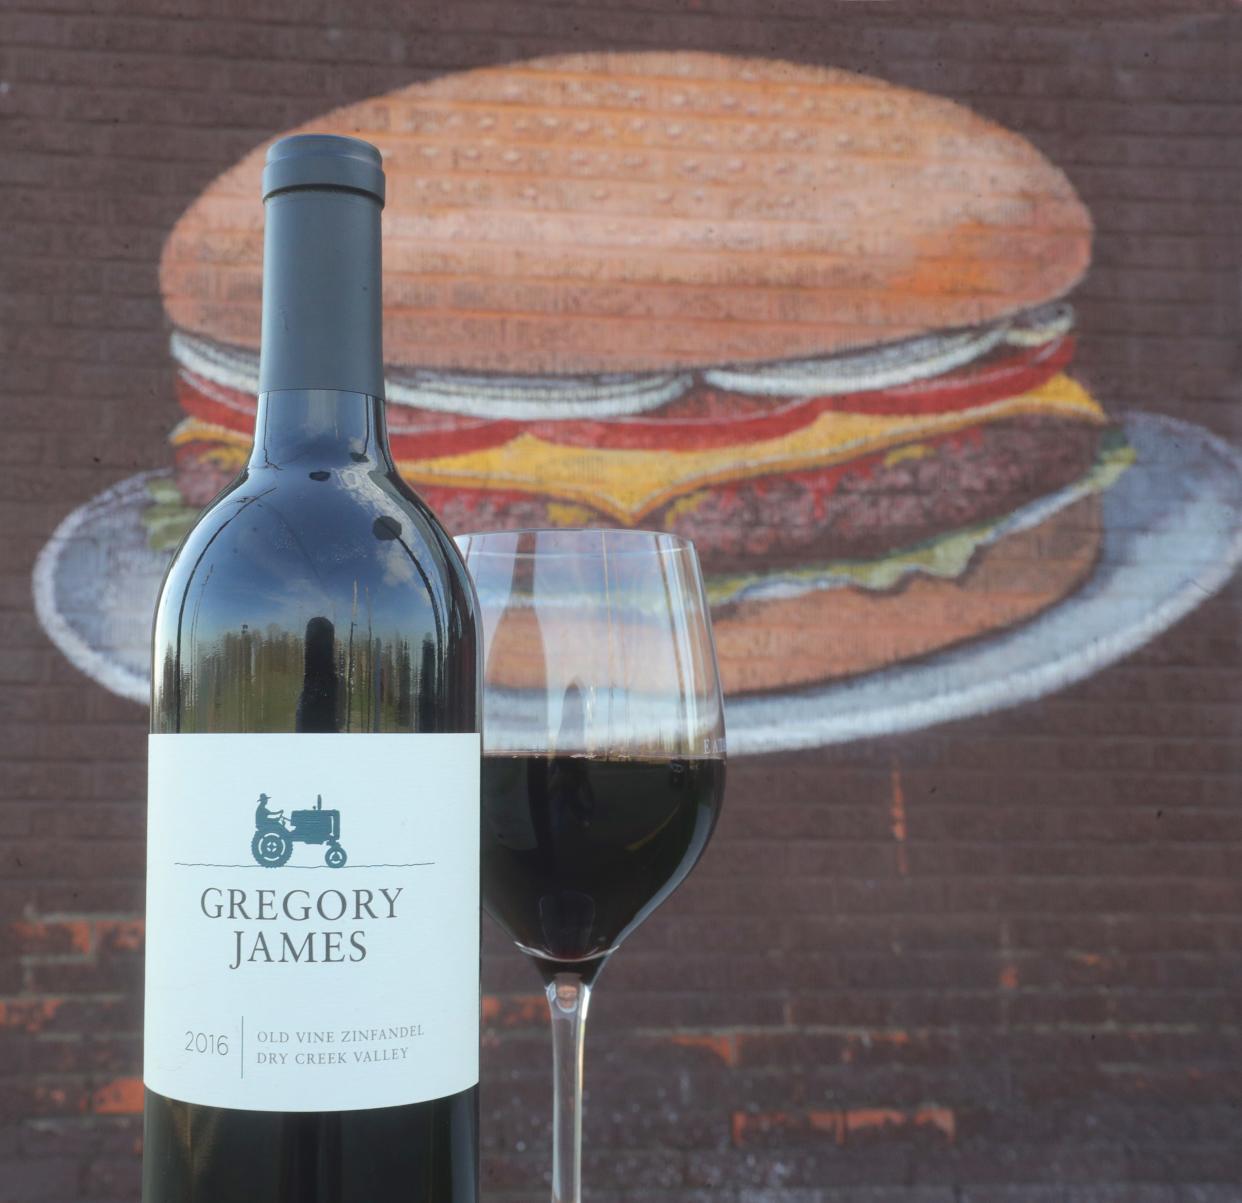 A glass of Gregory James old vine zinfandel from Dry Creek Valley is the perfect partner with your favorite burger.